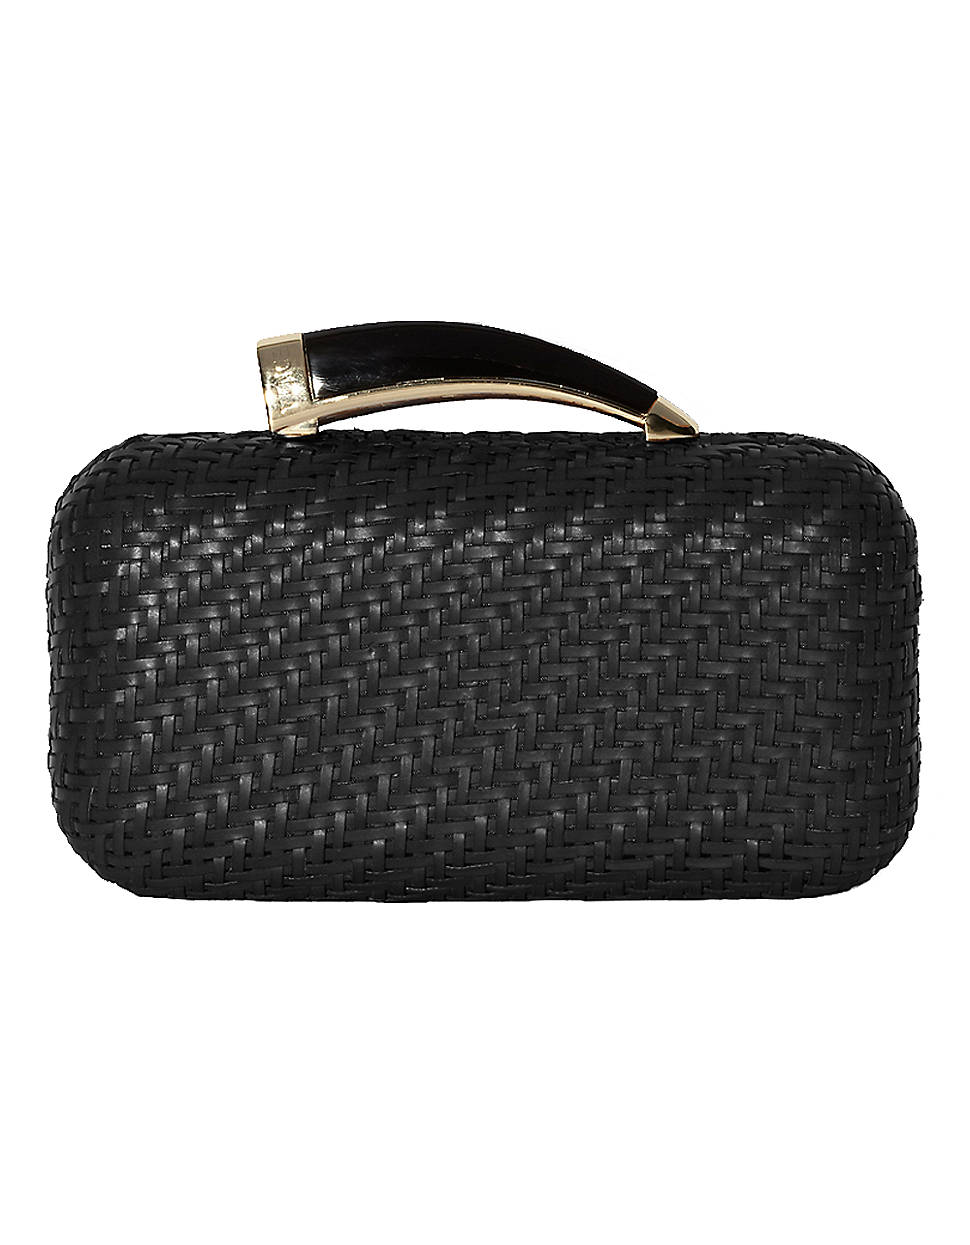 Vince Camuto Horn Woven Clutch in Black (caviar) | Lyst